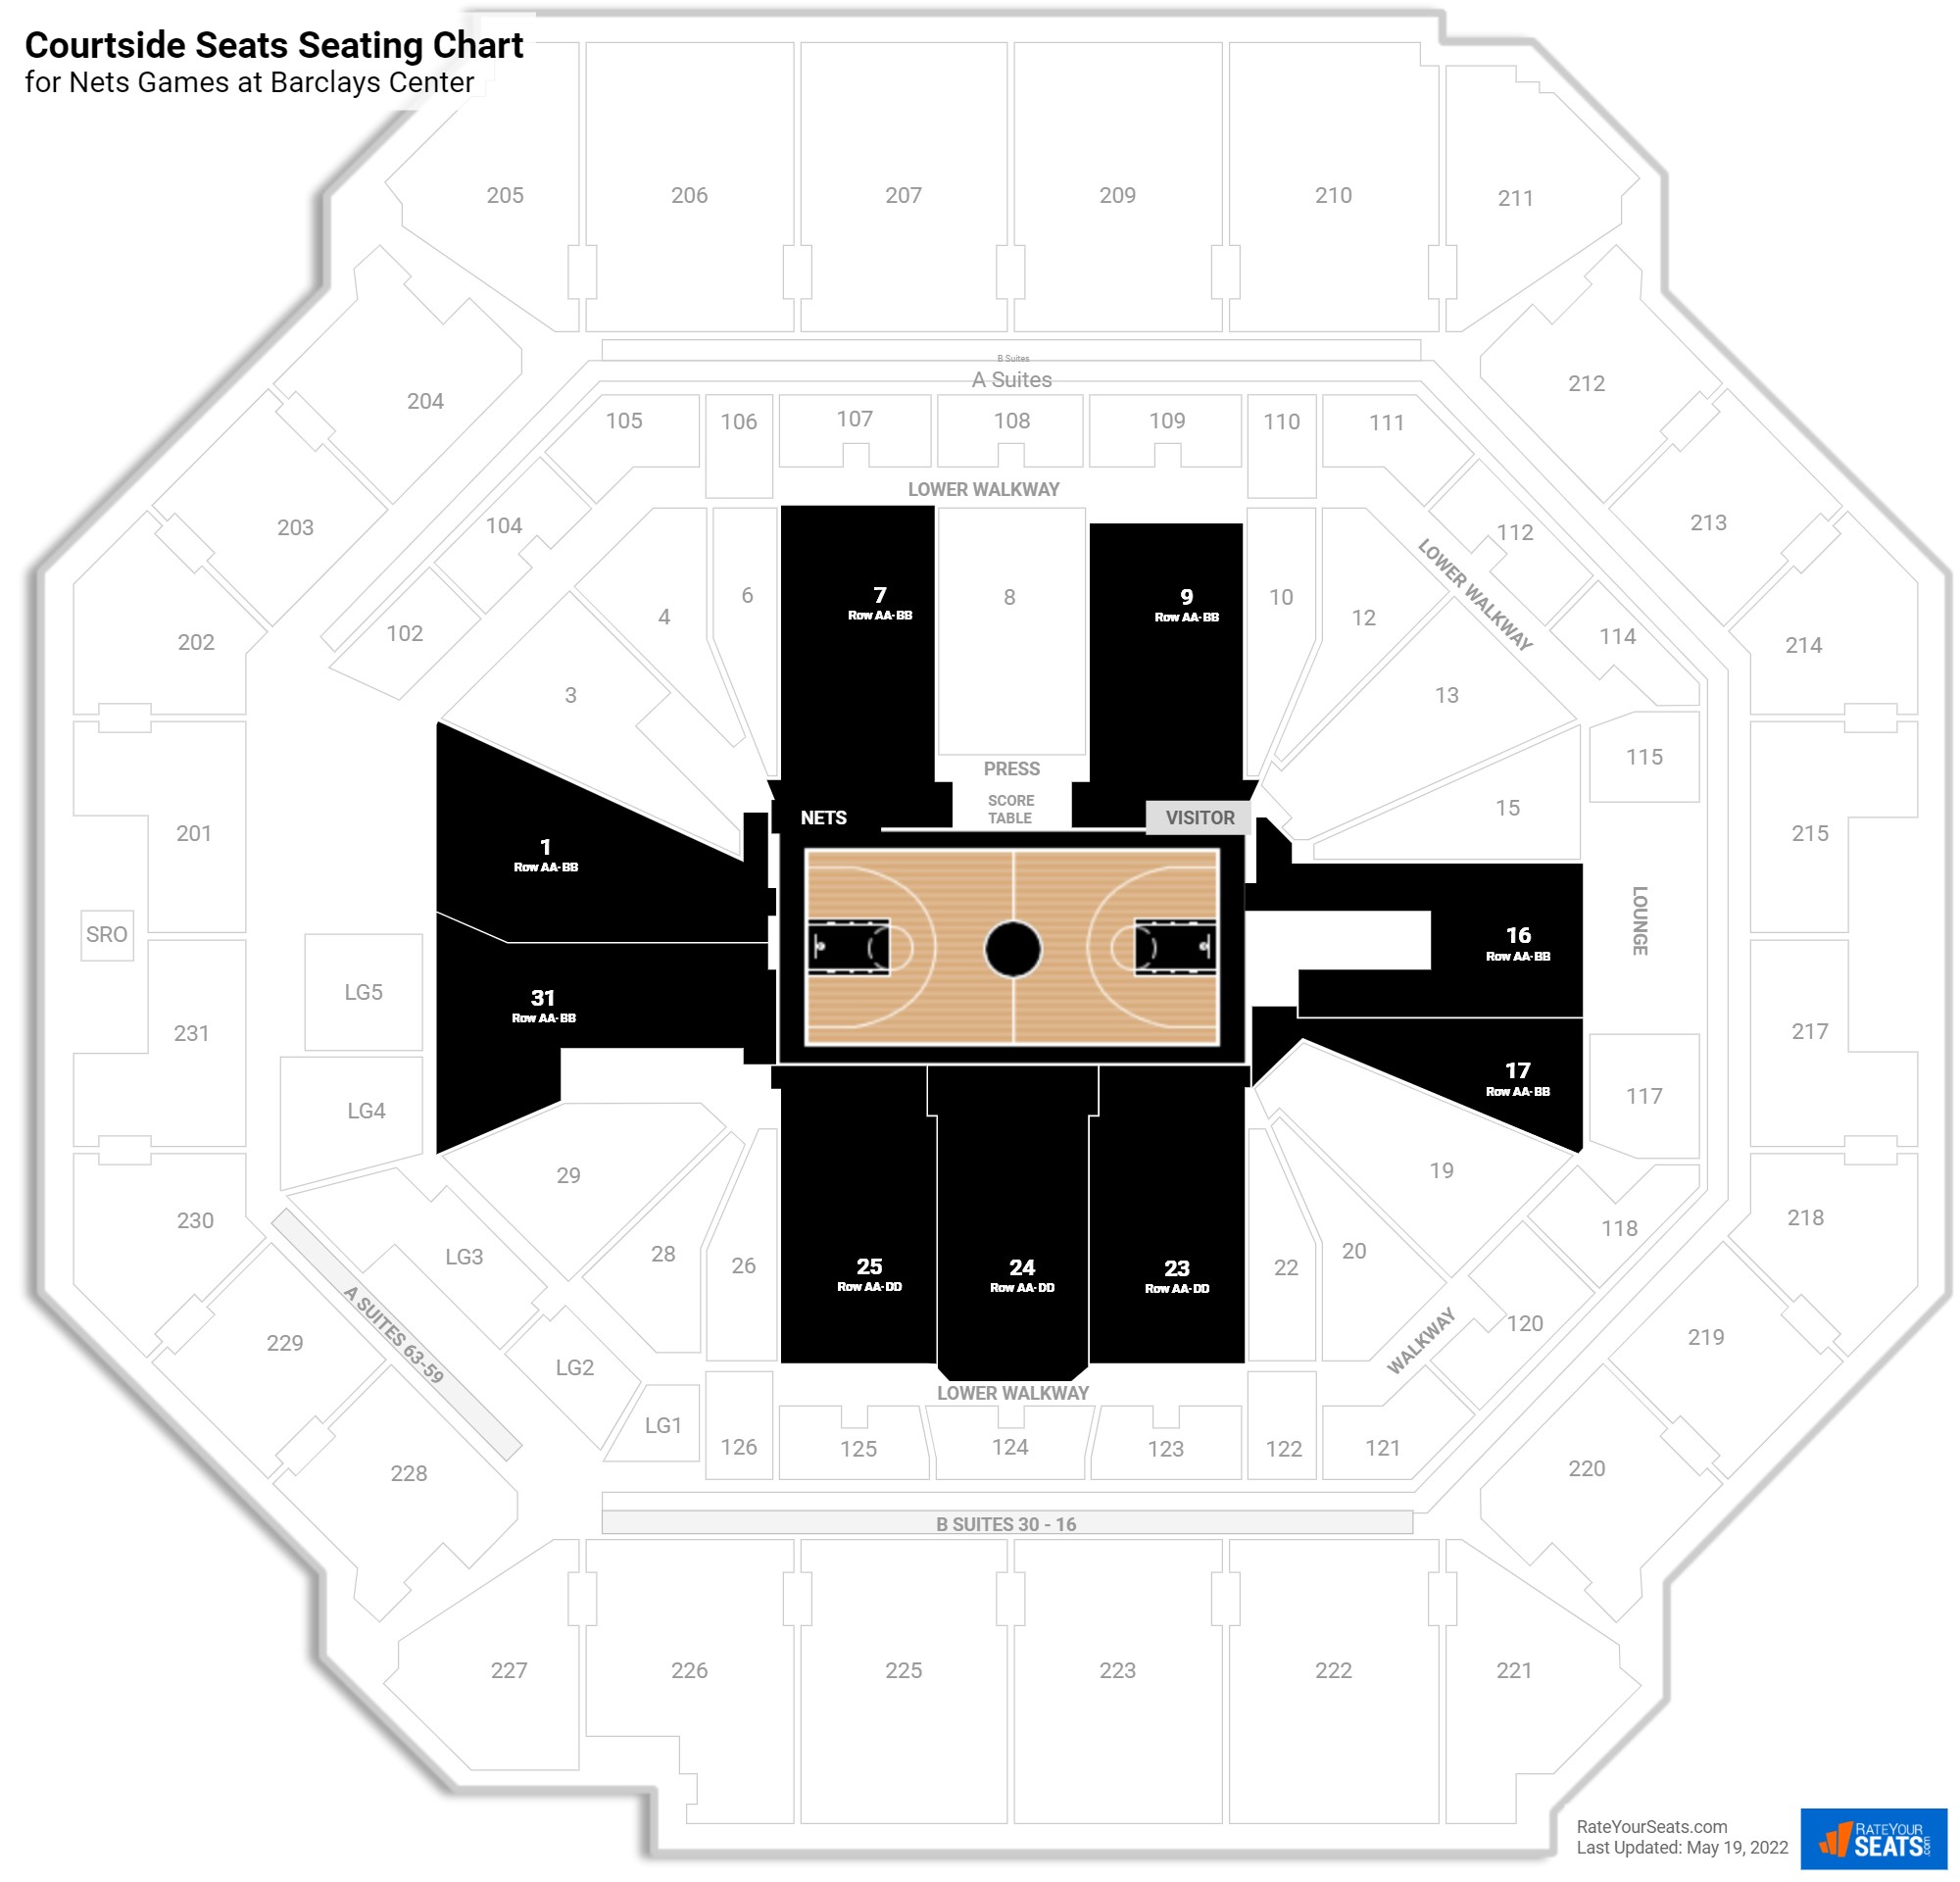 Nets Courtside Seats Seating Chart at Barclays Center